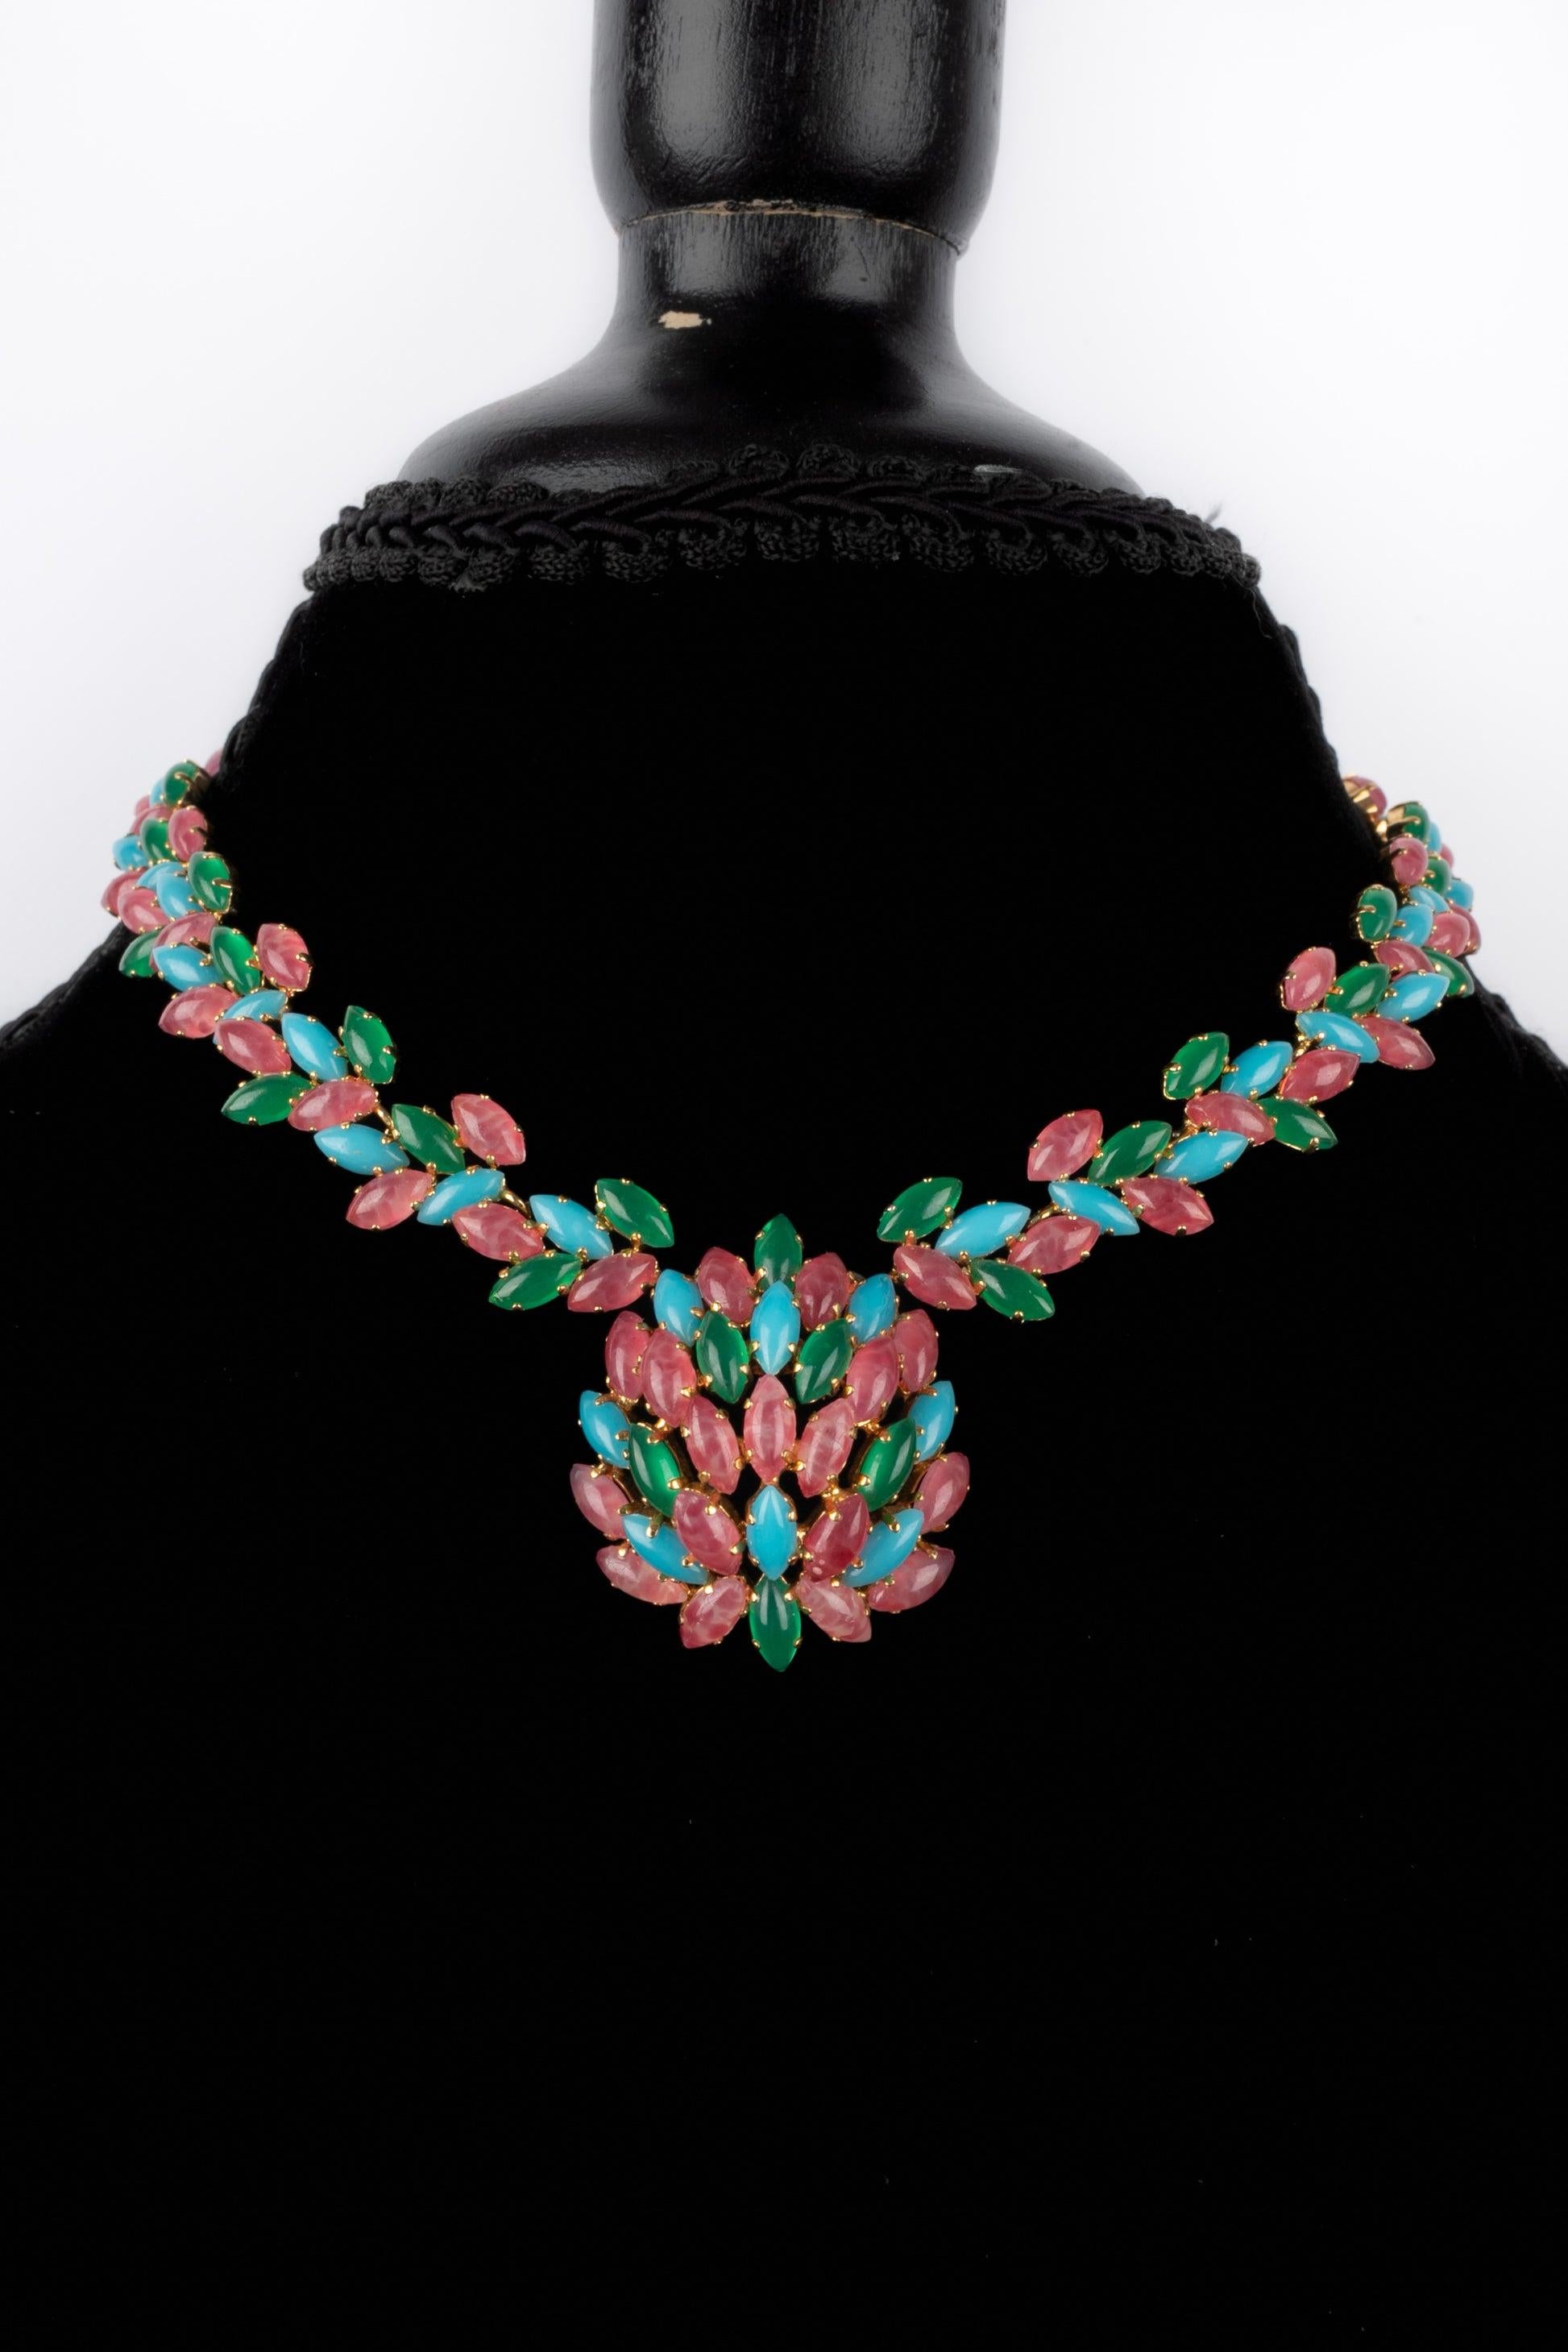 Dior - Golden metal necklace with green, blue, and pink glass paste. 1965 Collection.

Additional information:
Condition: Very good condition
Dimensions: Length: 38 cm
Period: 20th Century

Seller Reference: BC23